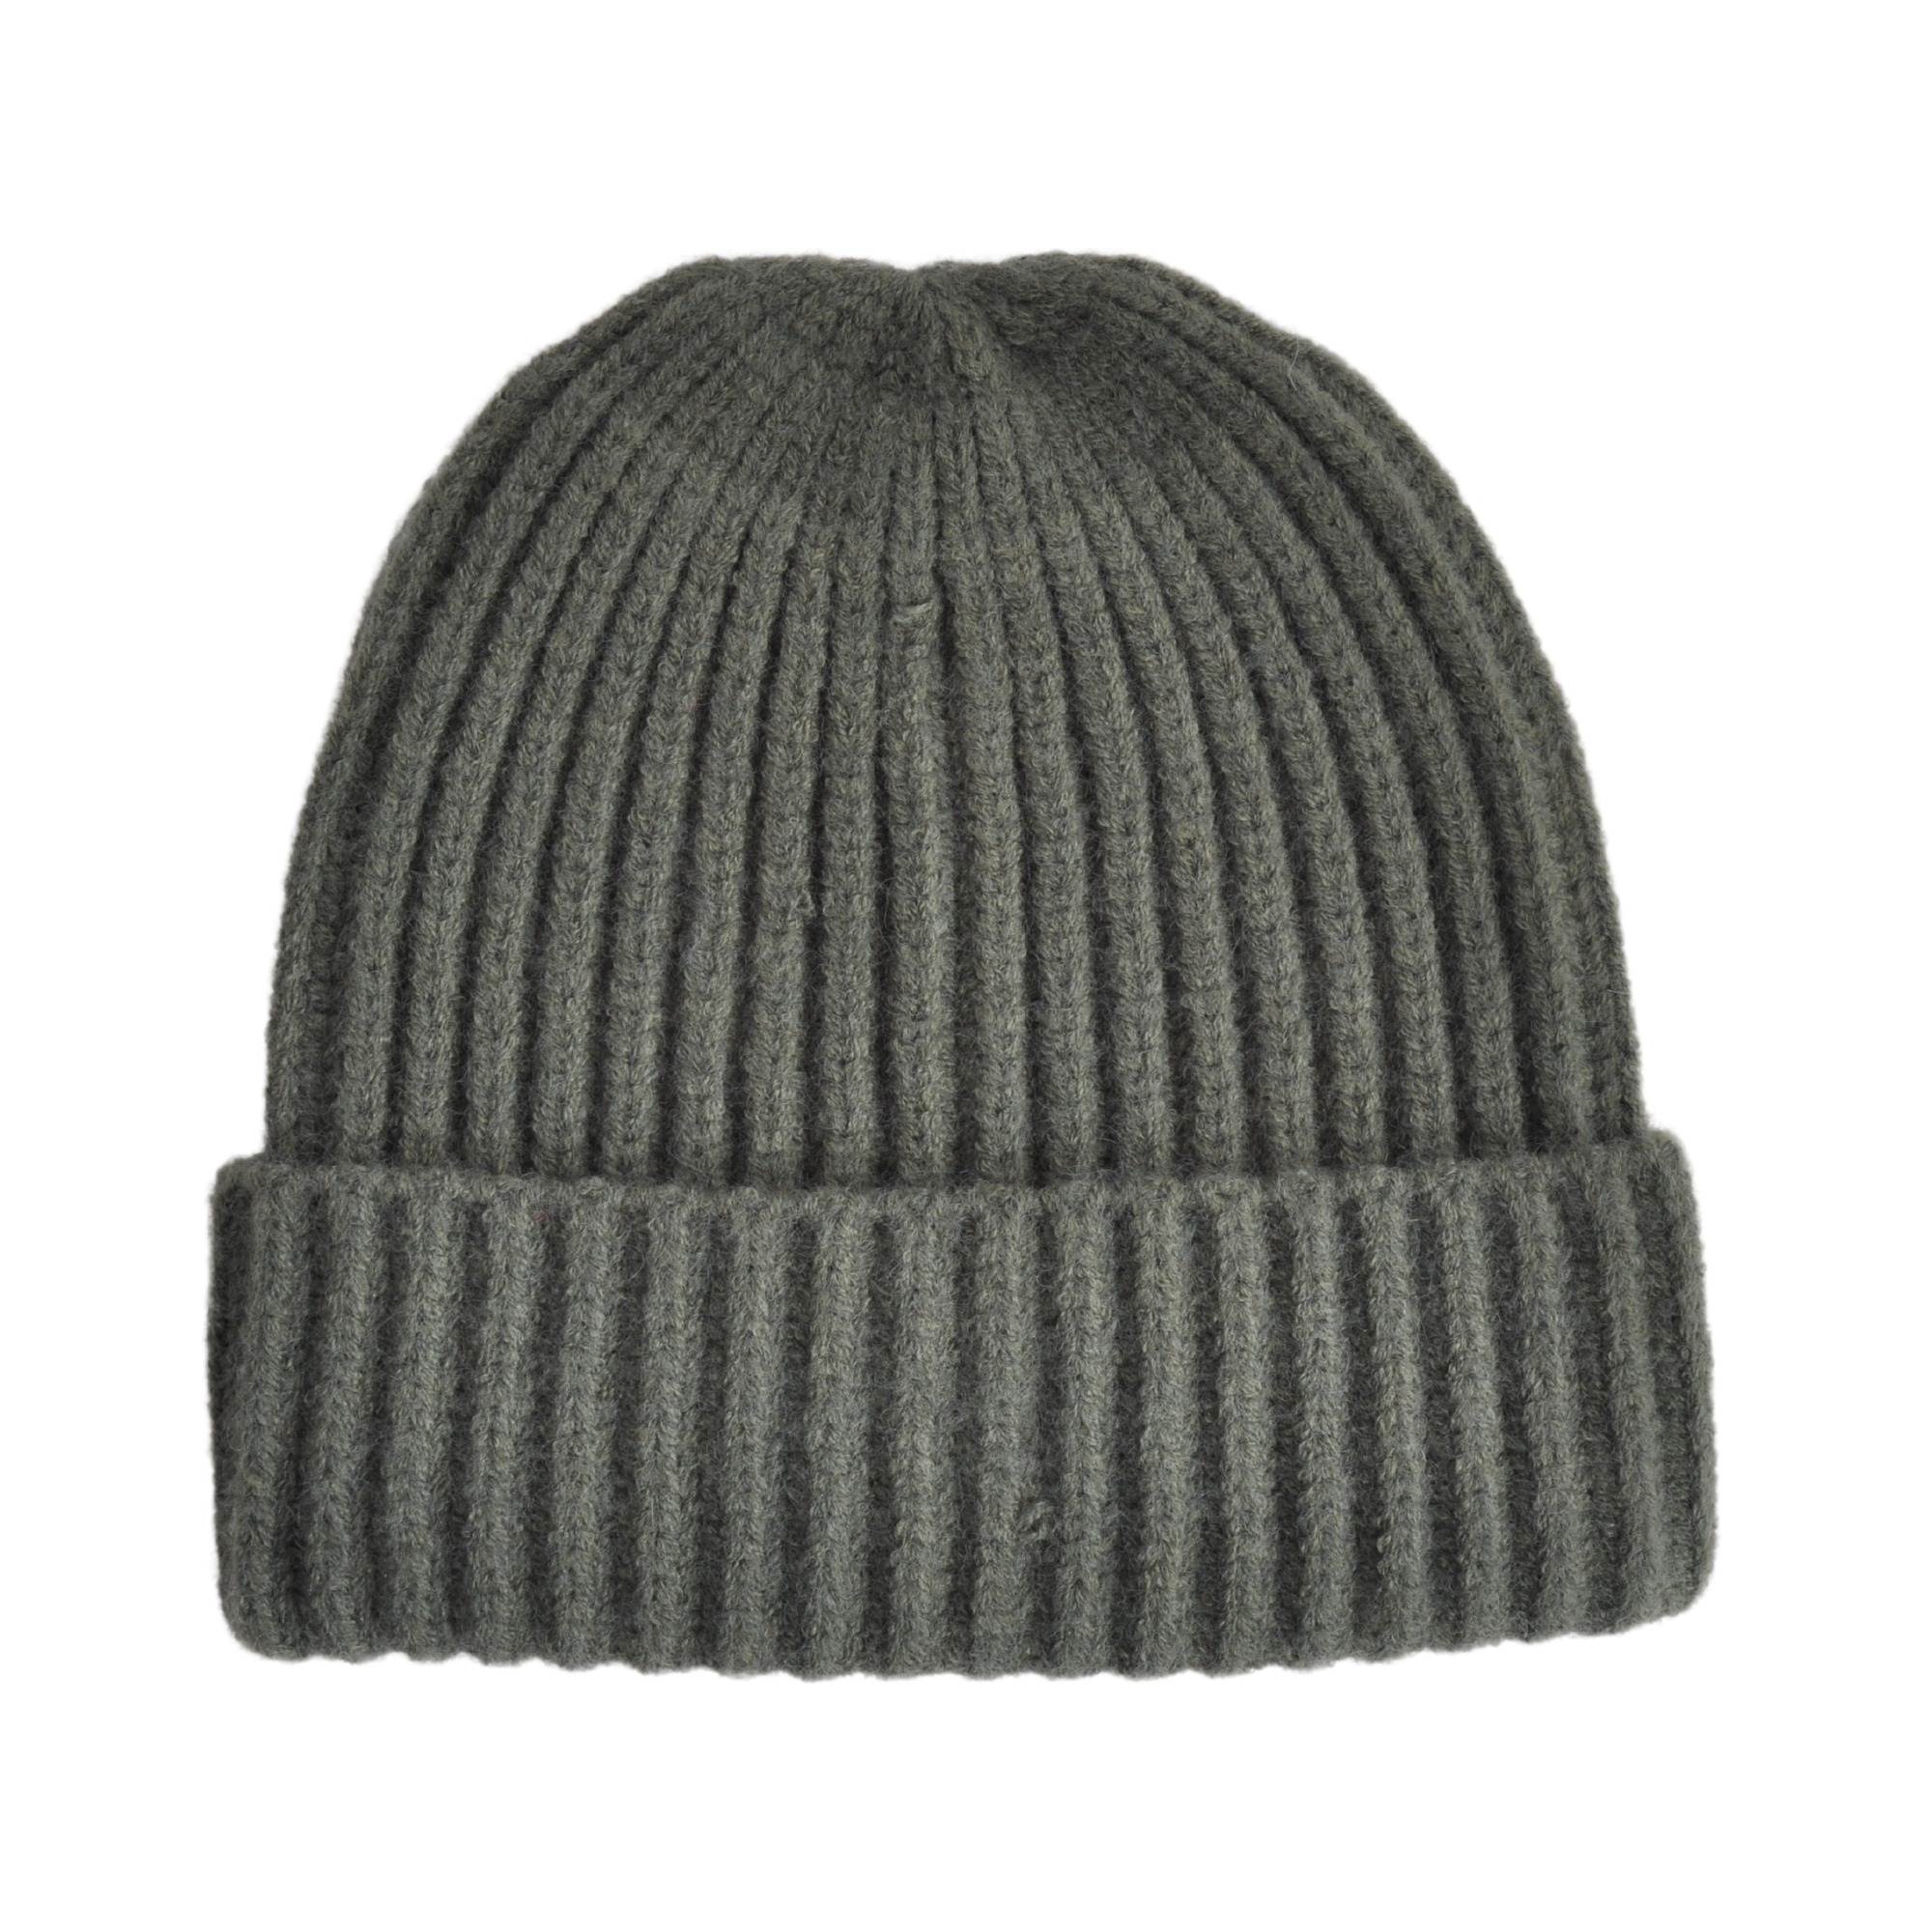 Ribbed Beanie - Forest Green